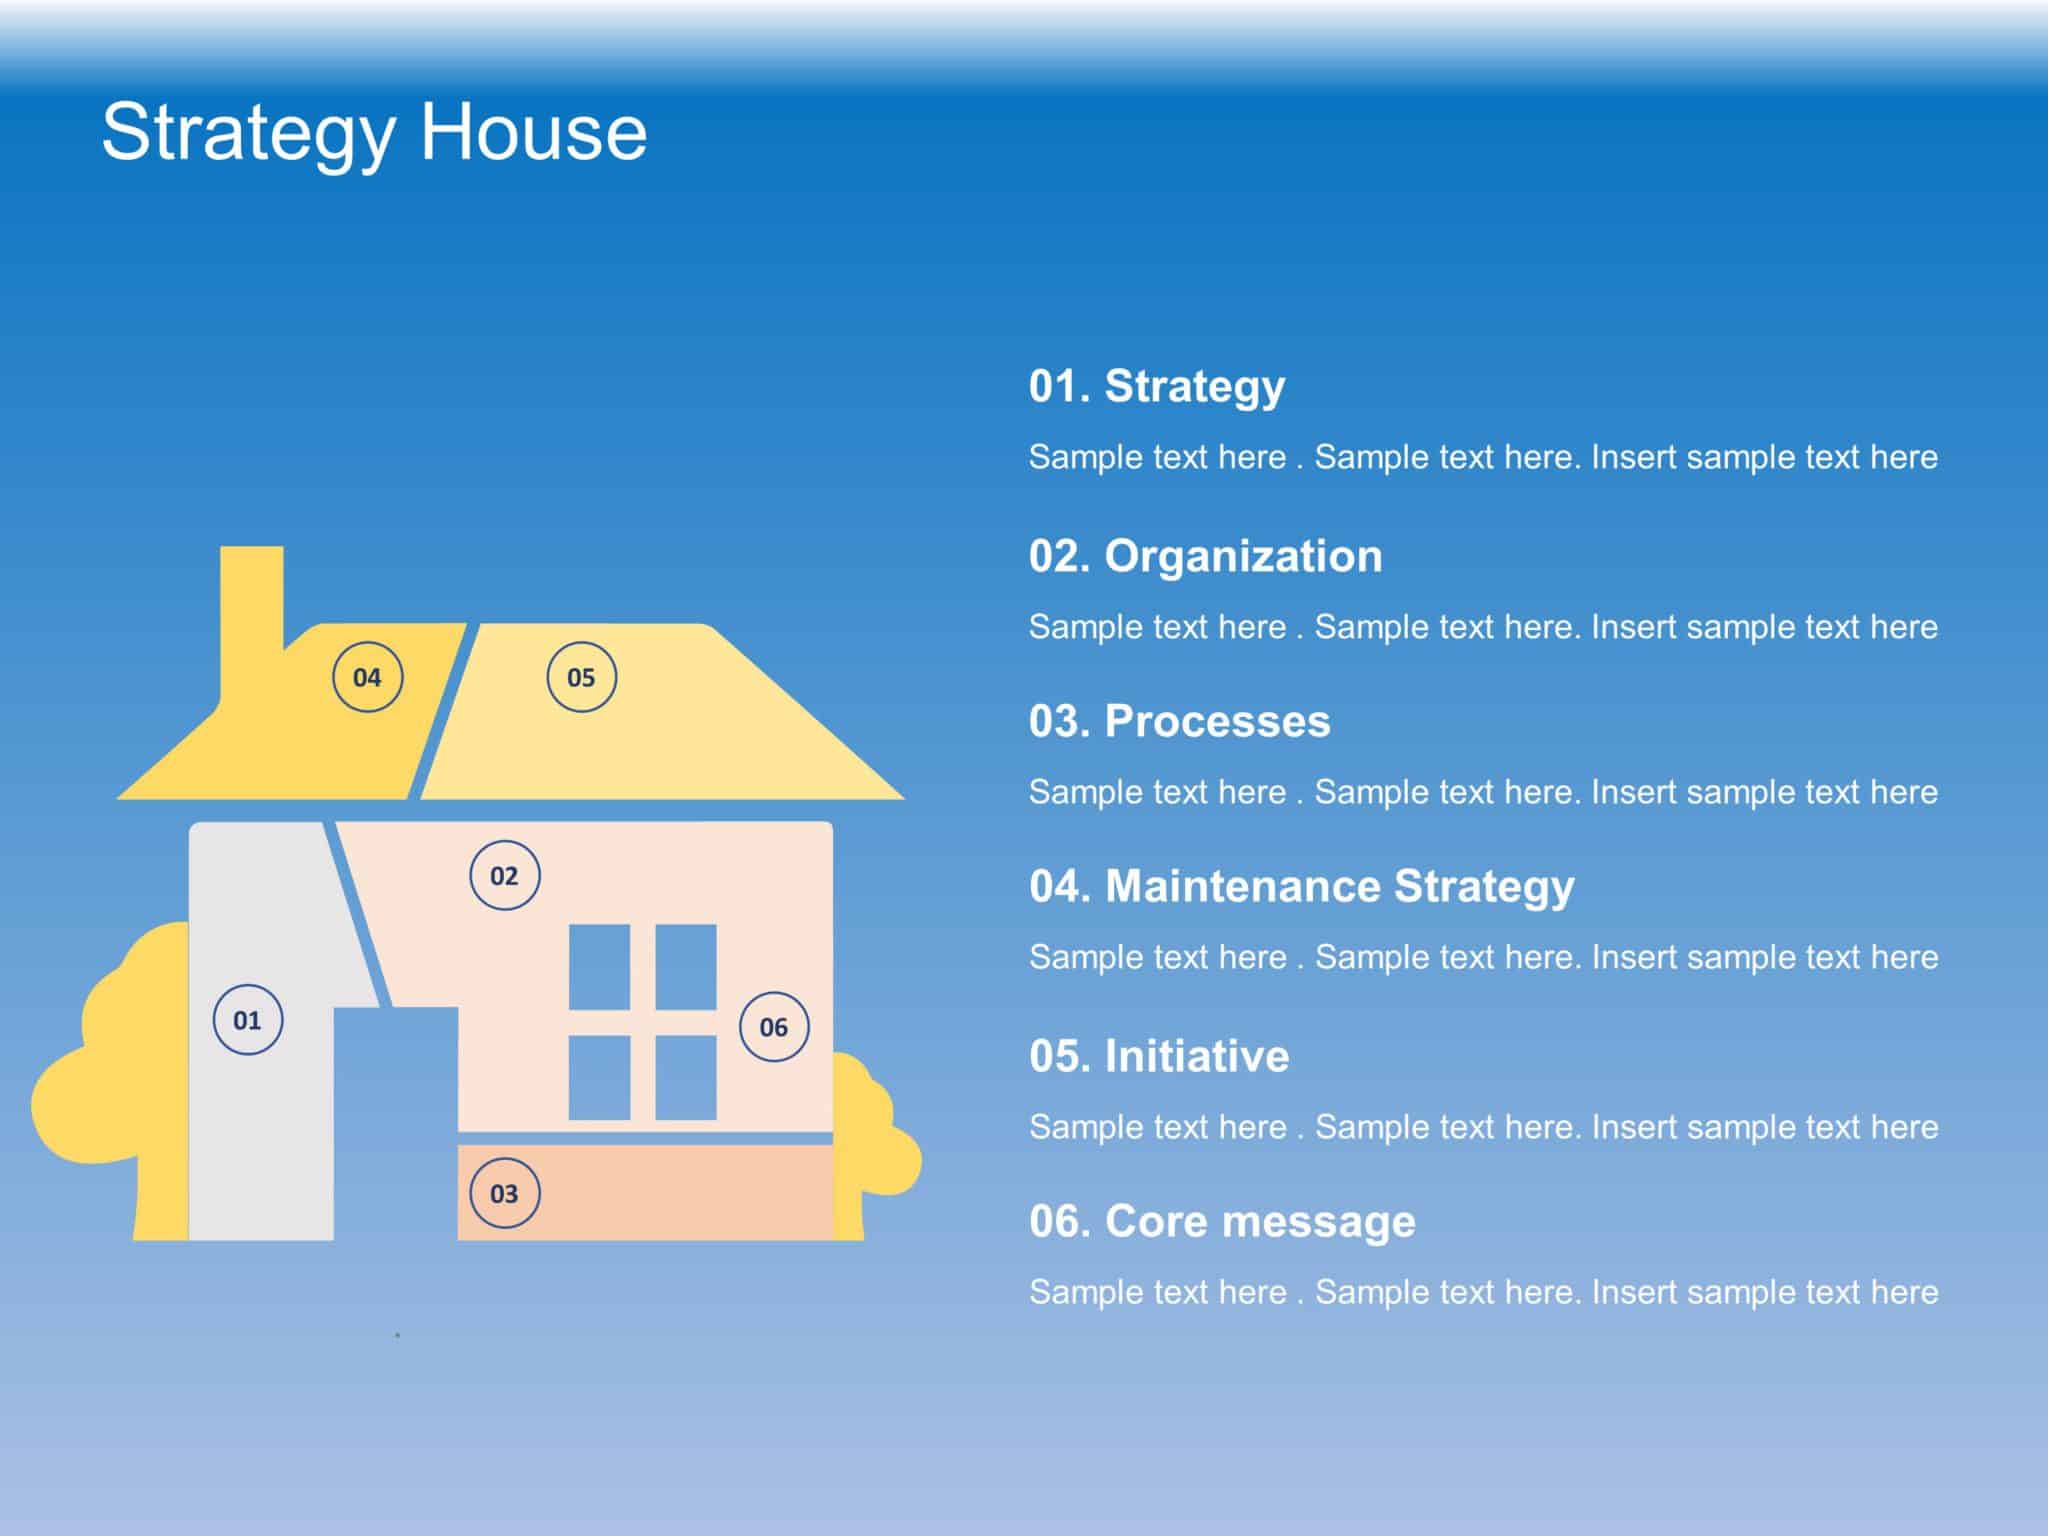 12 Free House Powerpoint Templates And Slides Slideuplift 0041